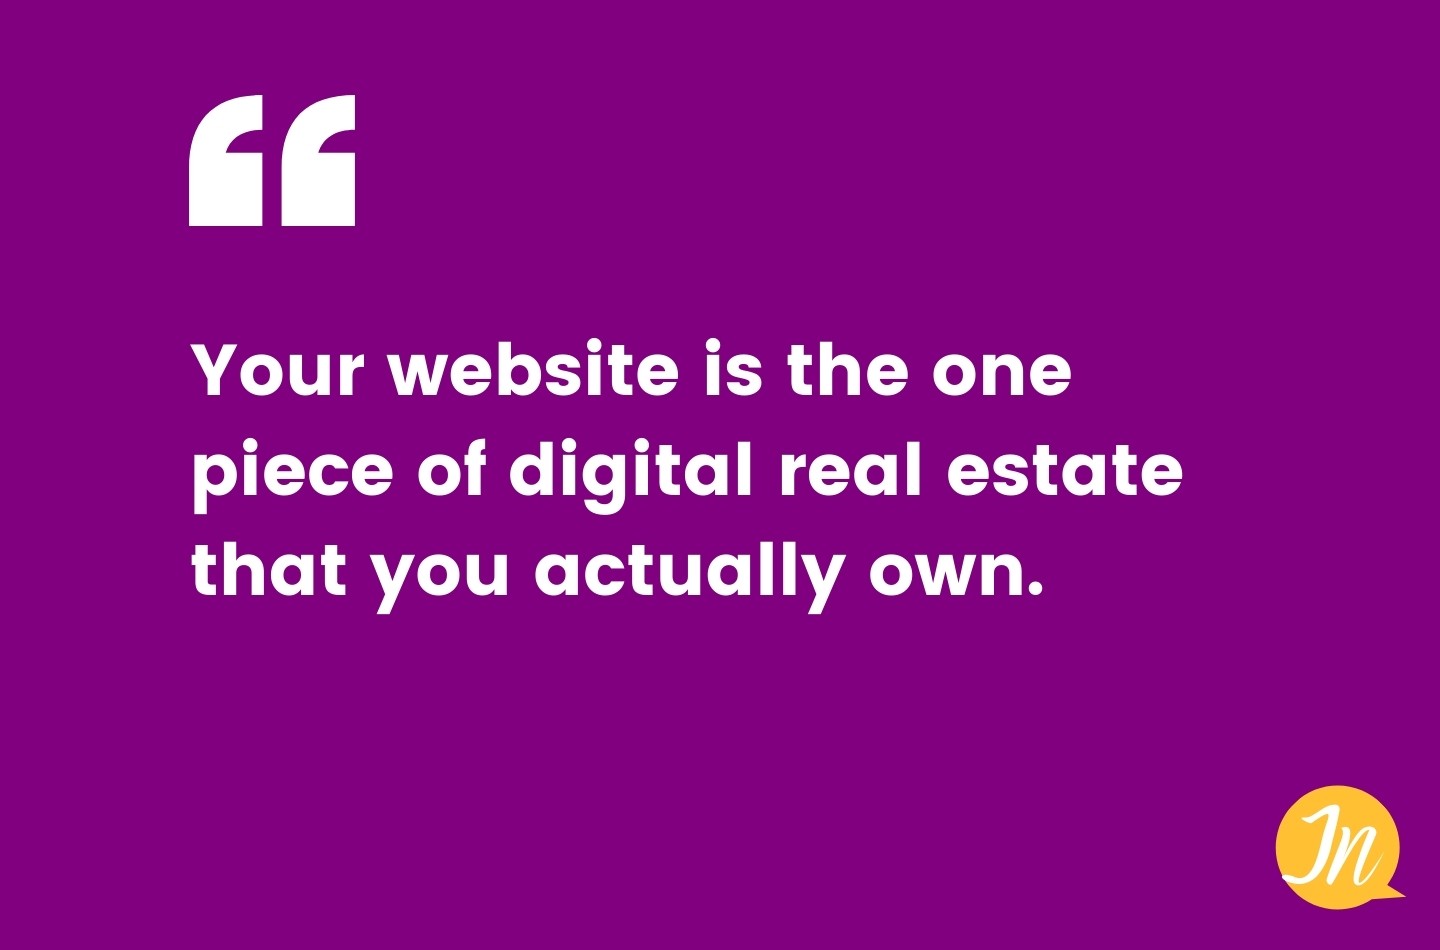 Your website is the one piece of digital real estate that you actually own